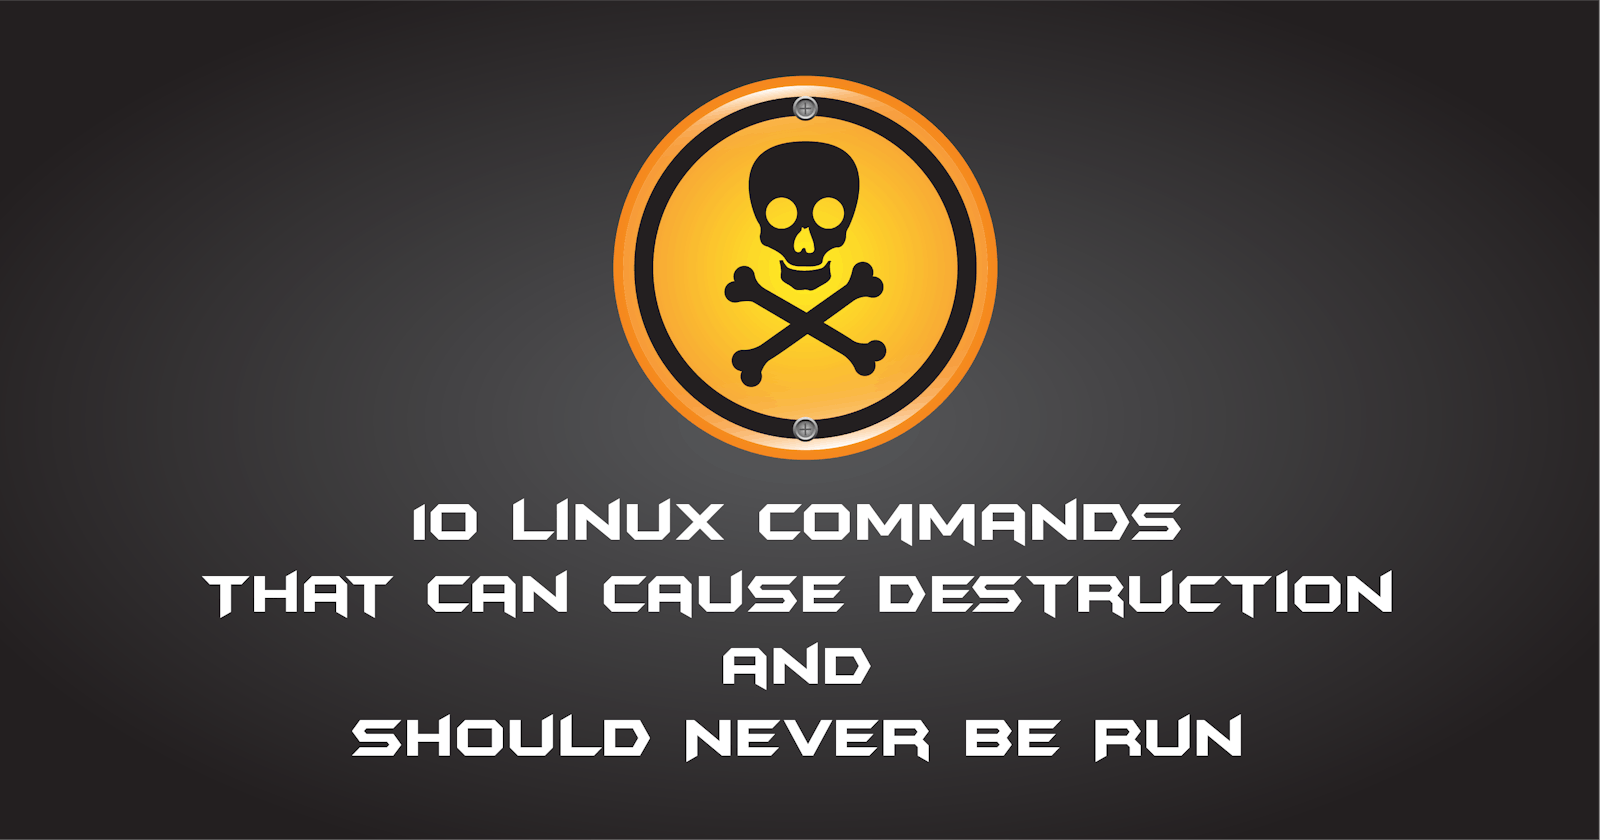 10 Linux command that can cause destruction and should never be run